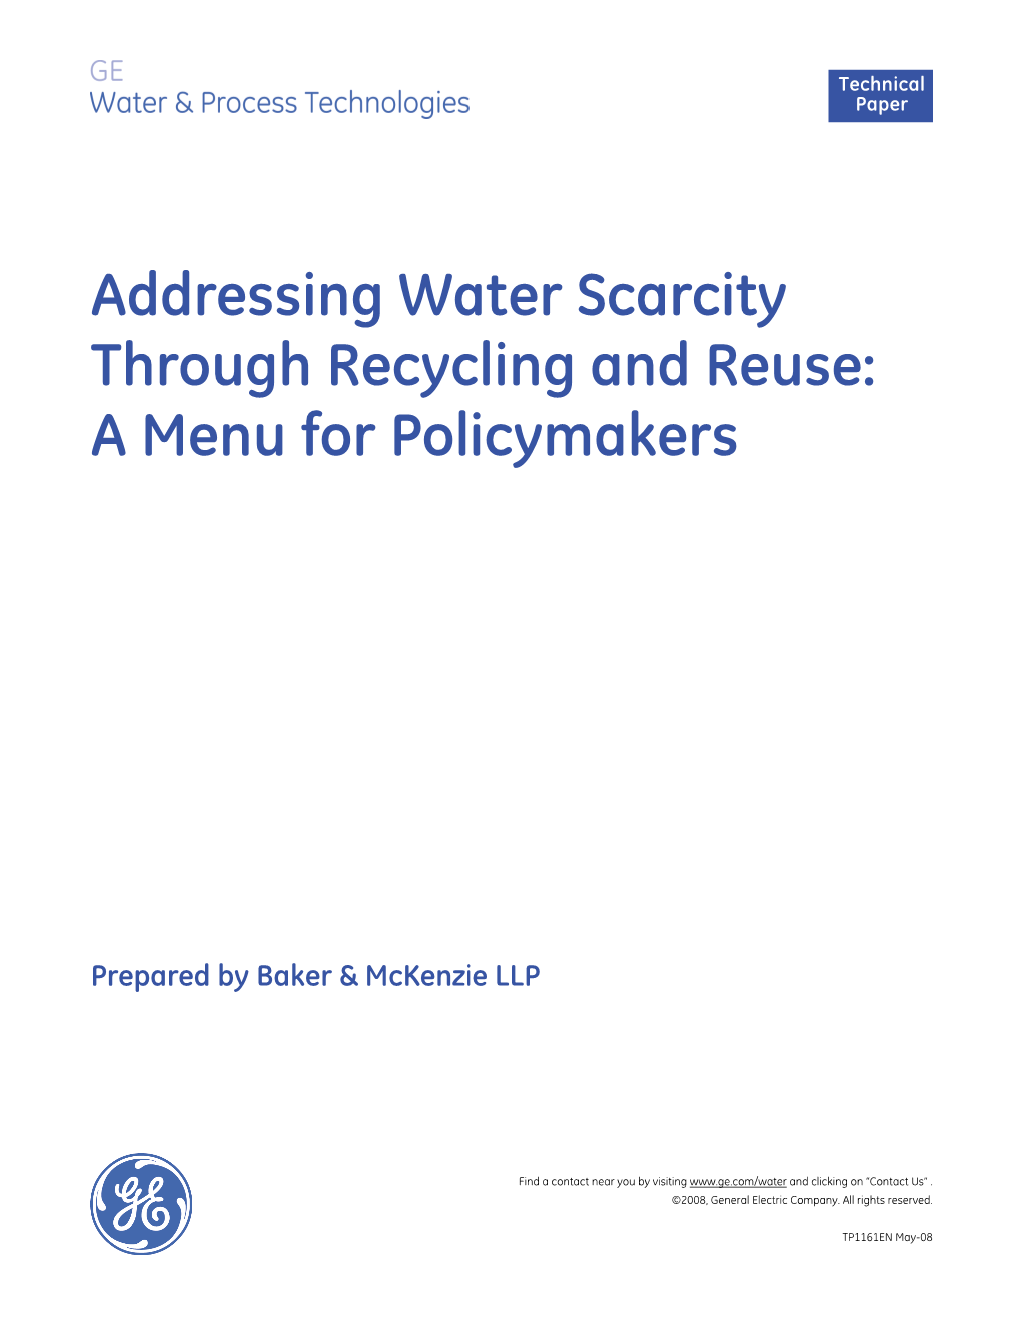 Addressing Water Scarcity Through Recycling and Reuse: a Menu for Policymakers